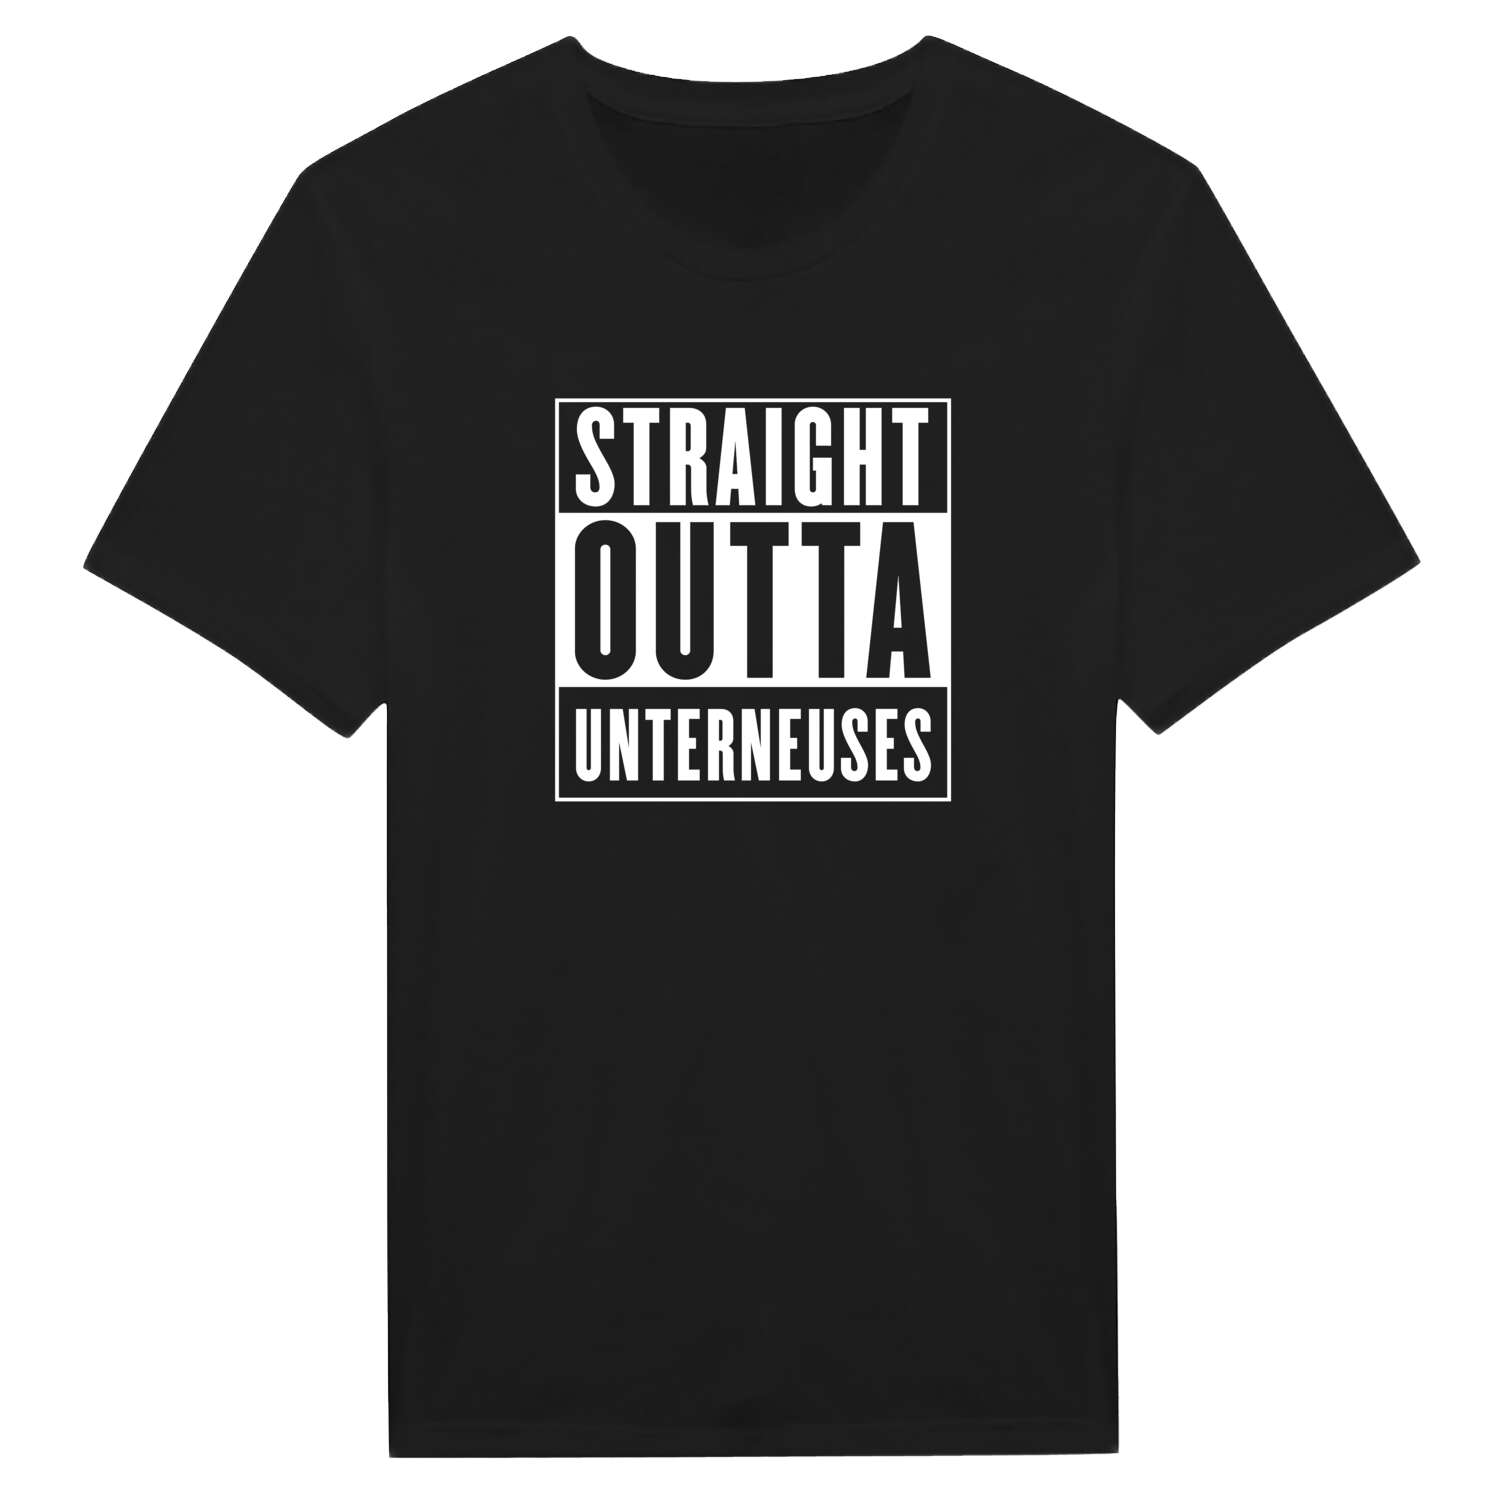 Unterneuses T-Shirt »Straight Outta«